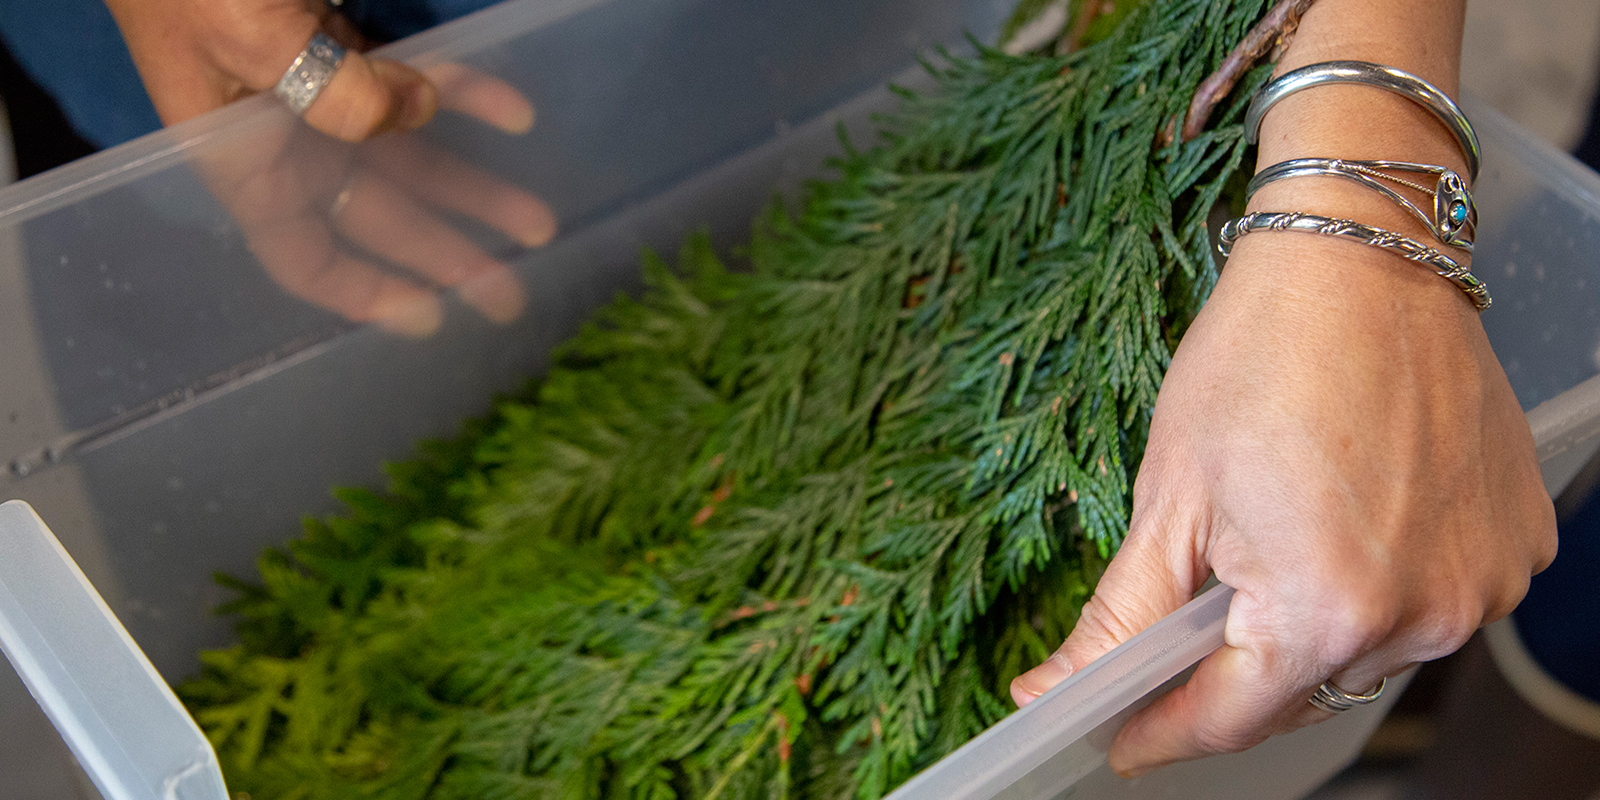 A woman holds a bin filled with cedar branches